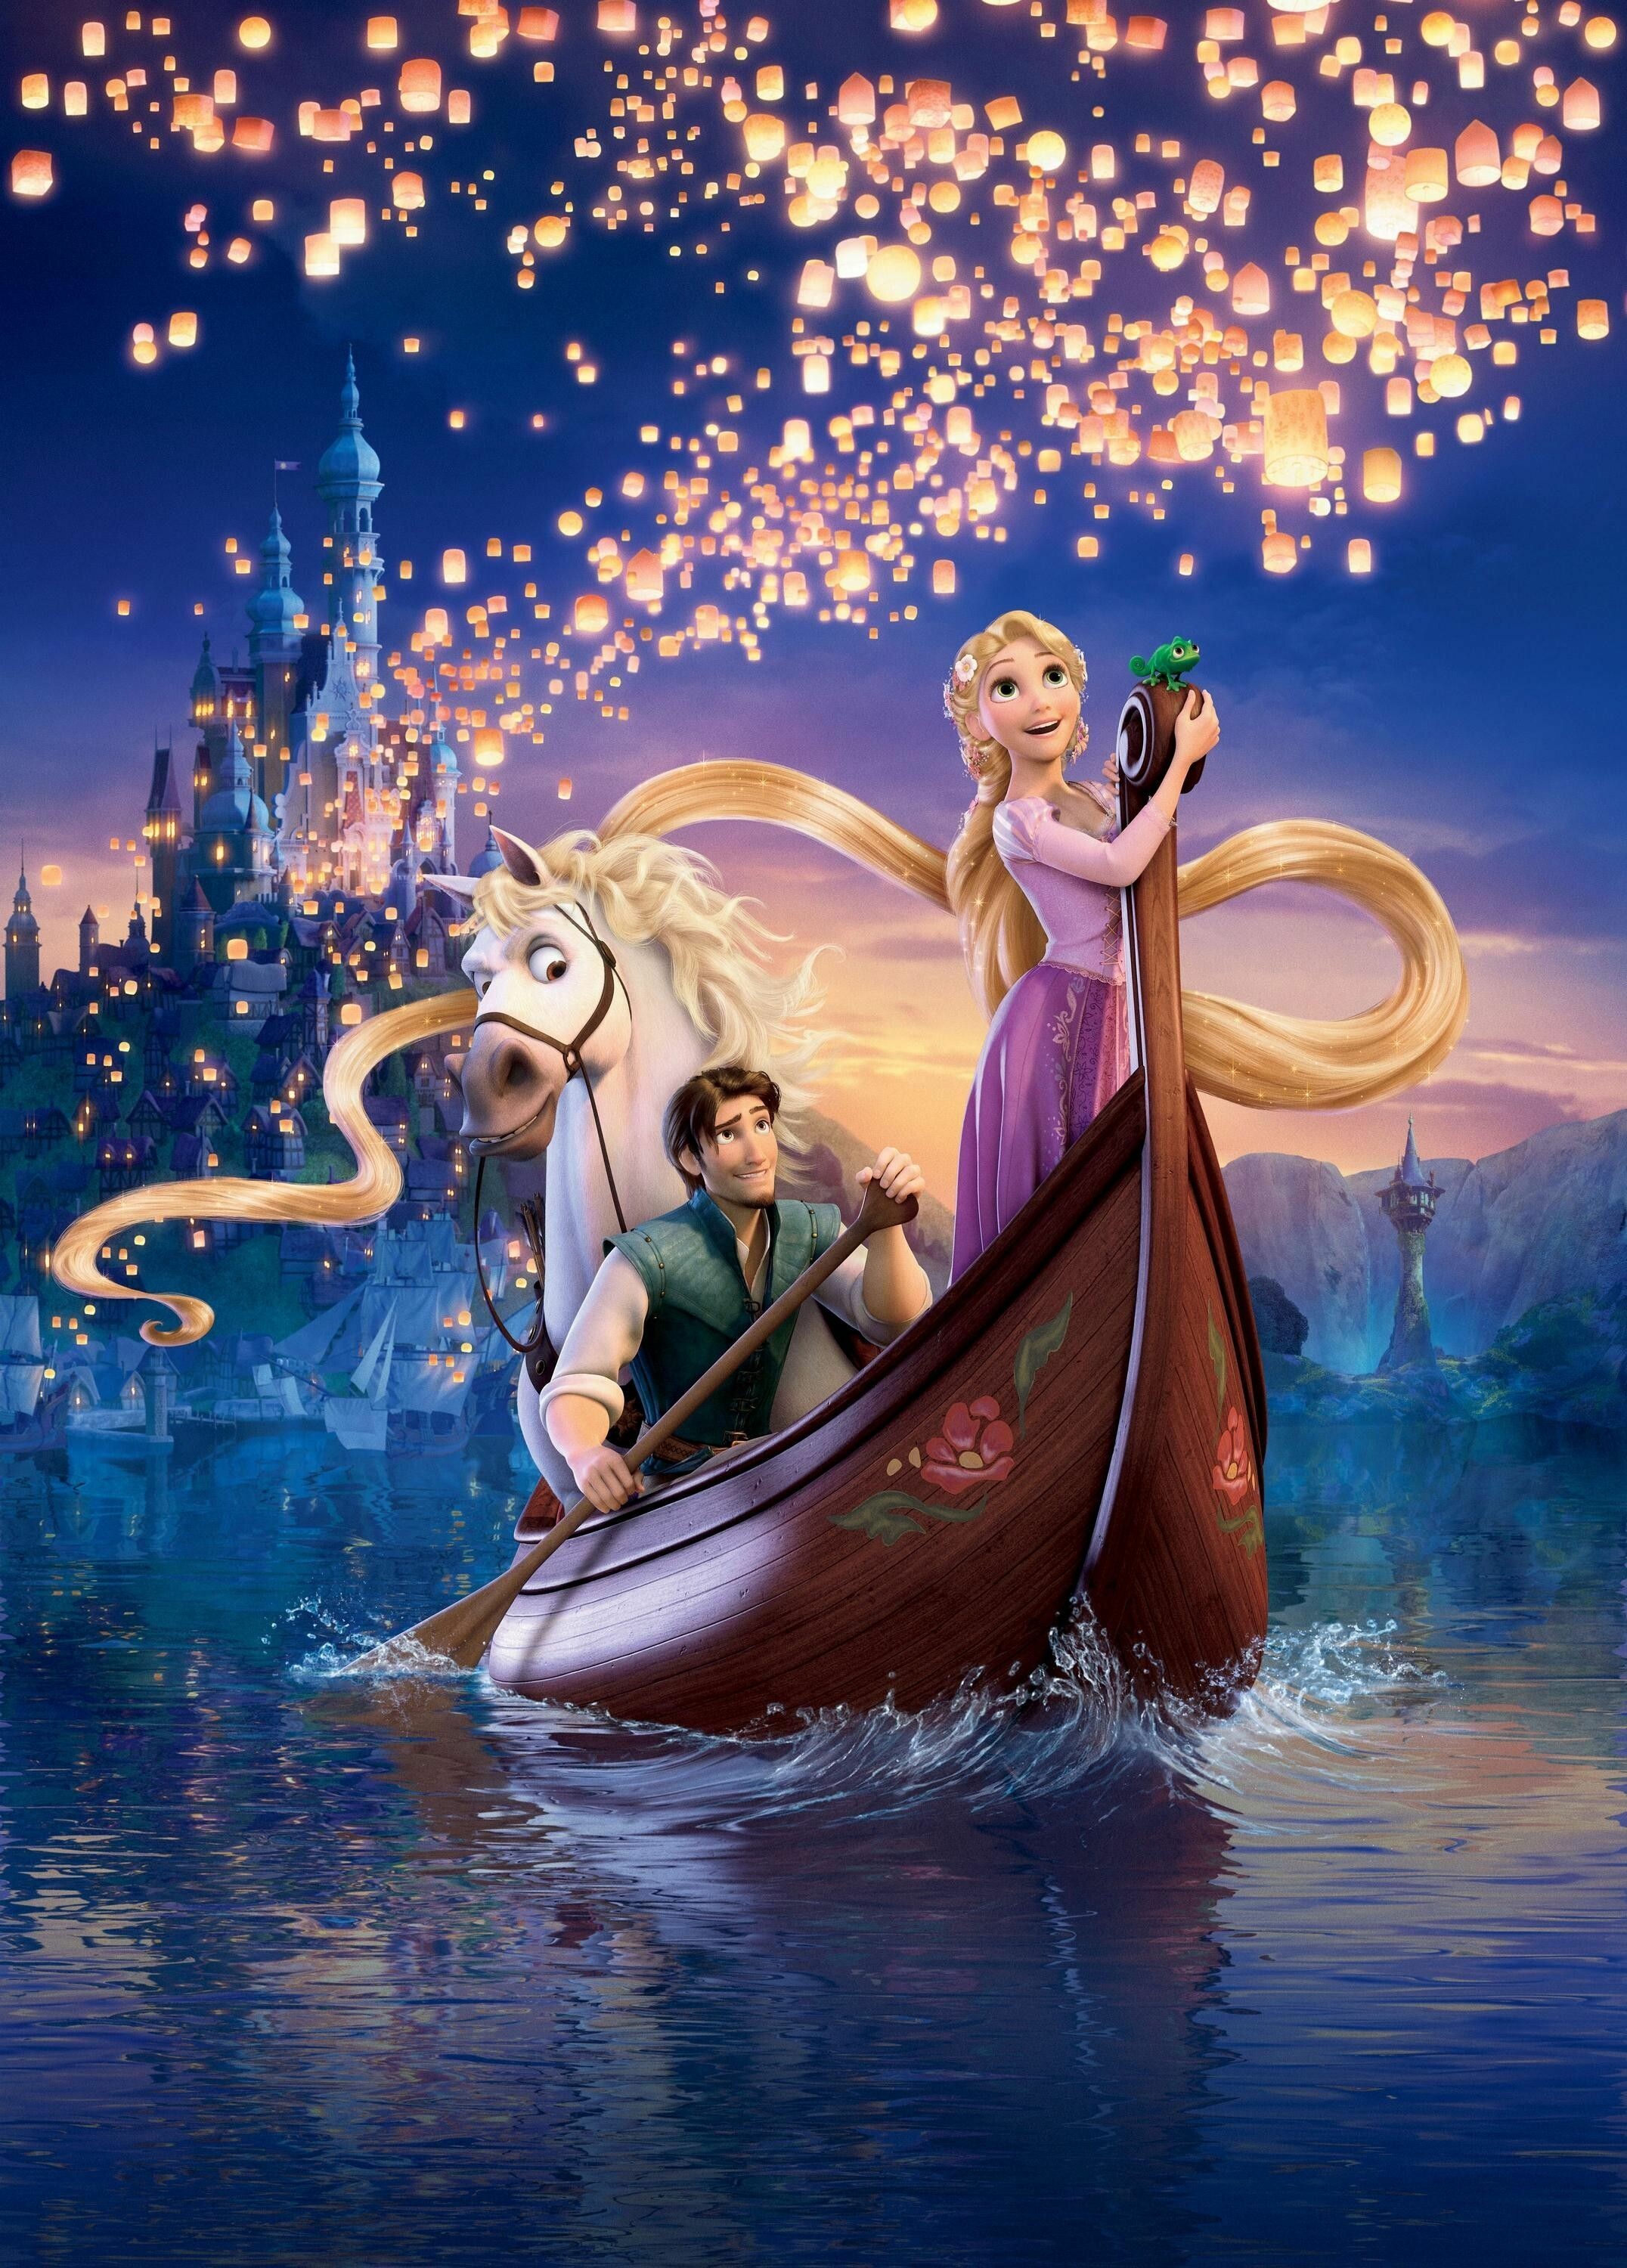 Tangled: The story of Rapunzel, a lost young princess with magical long blonde hair who yearns to leave her secluded tower. 2160x3000 HD Background.